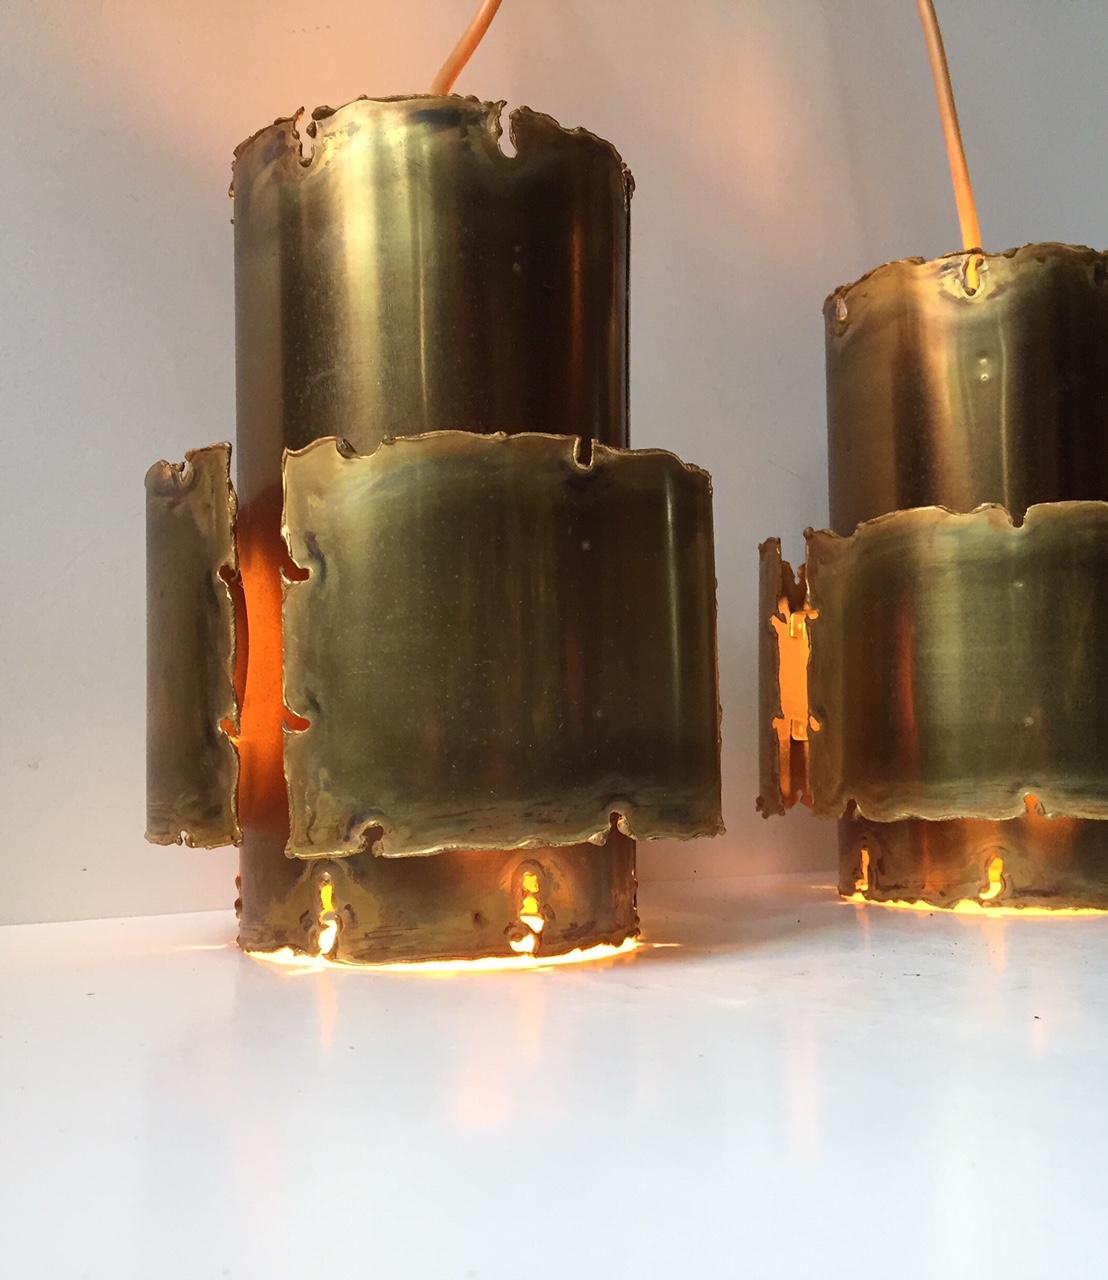 Danish Brutalist Torch Cut Brass Ceiling Lamps by Svend Aage Holm Sørensen, 1960s For Sale